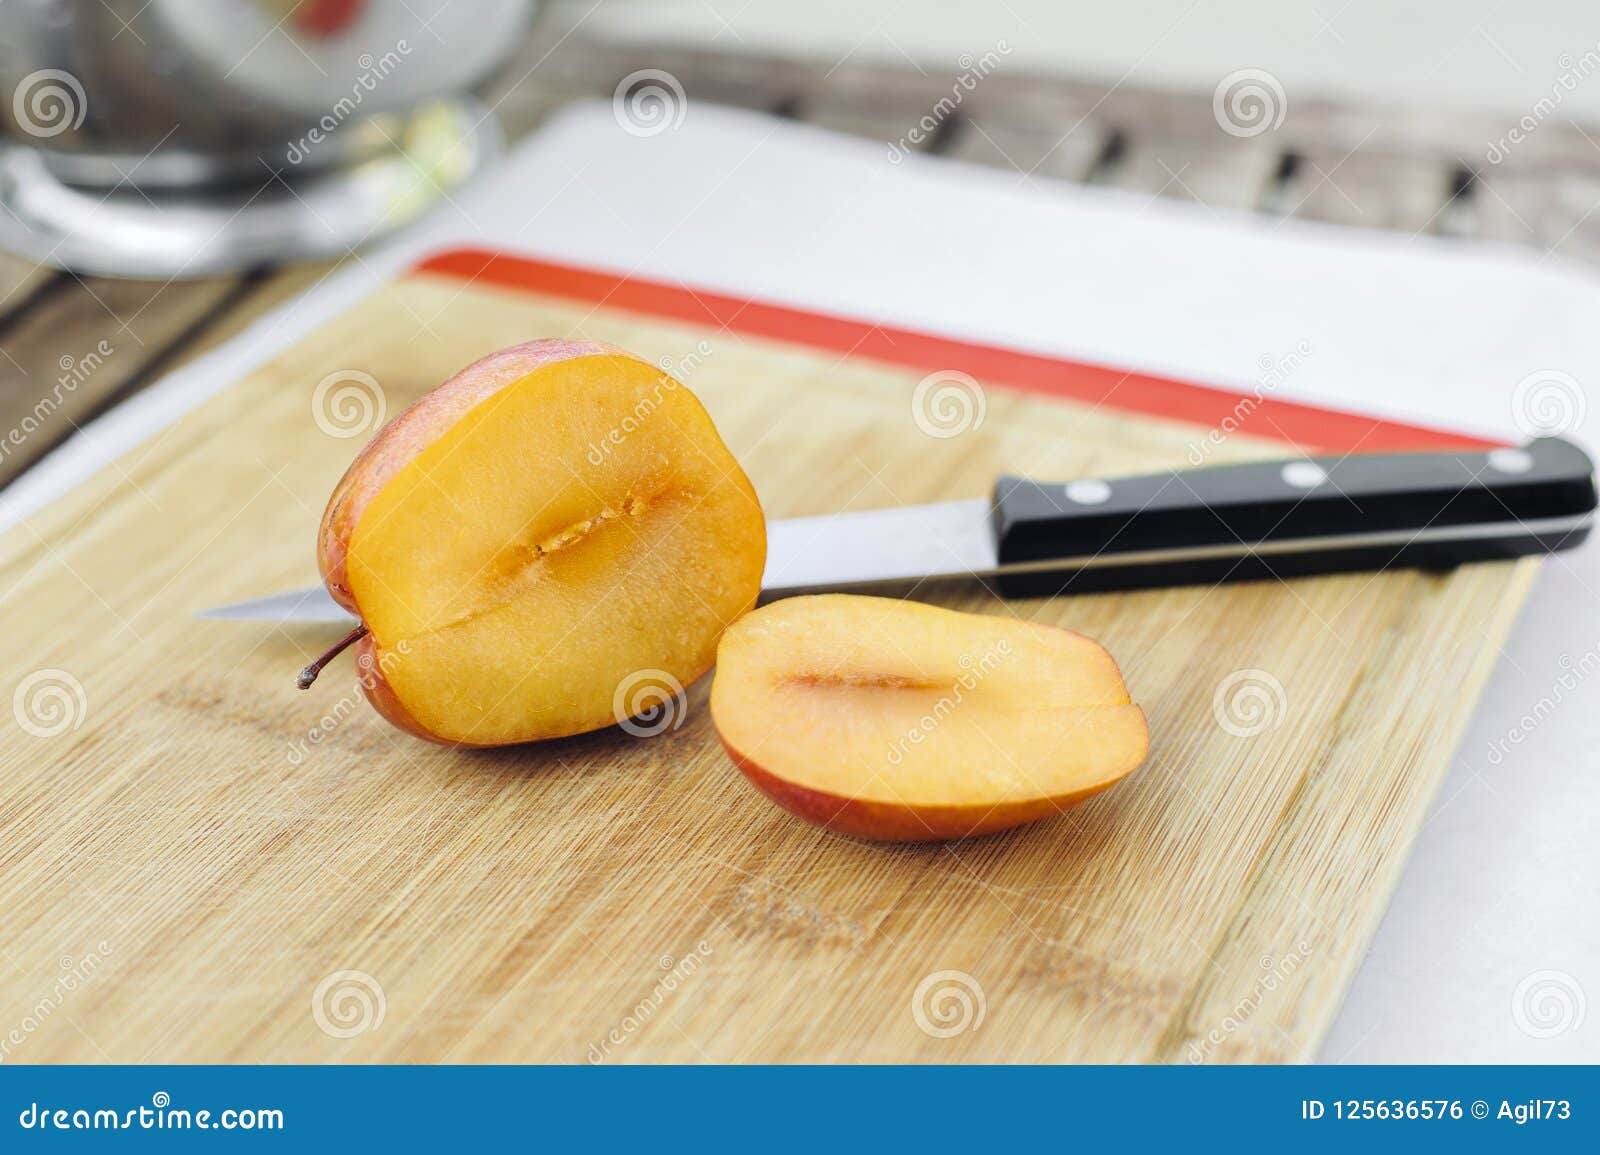 amigo pluot sliced open with a knife